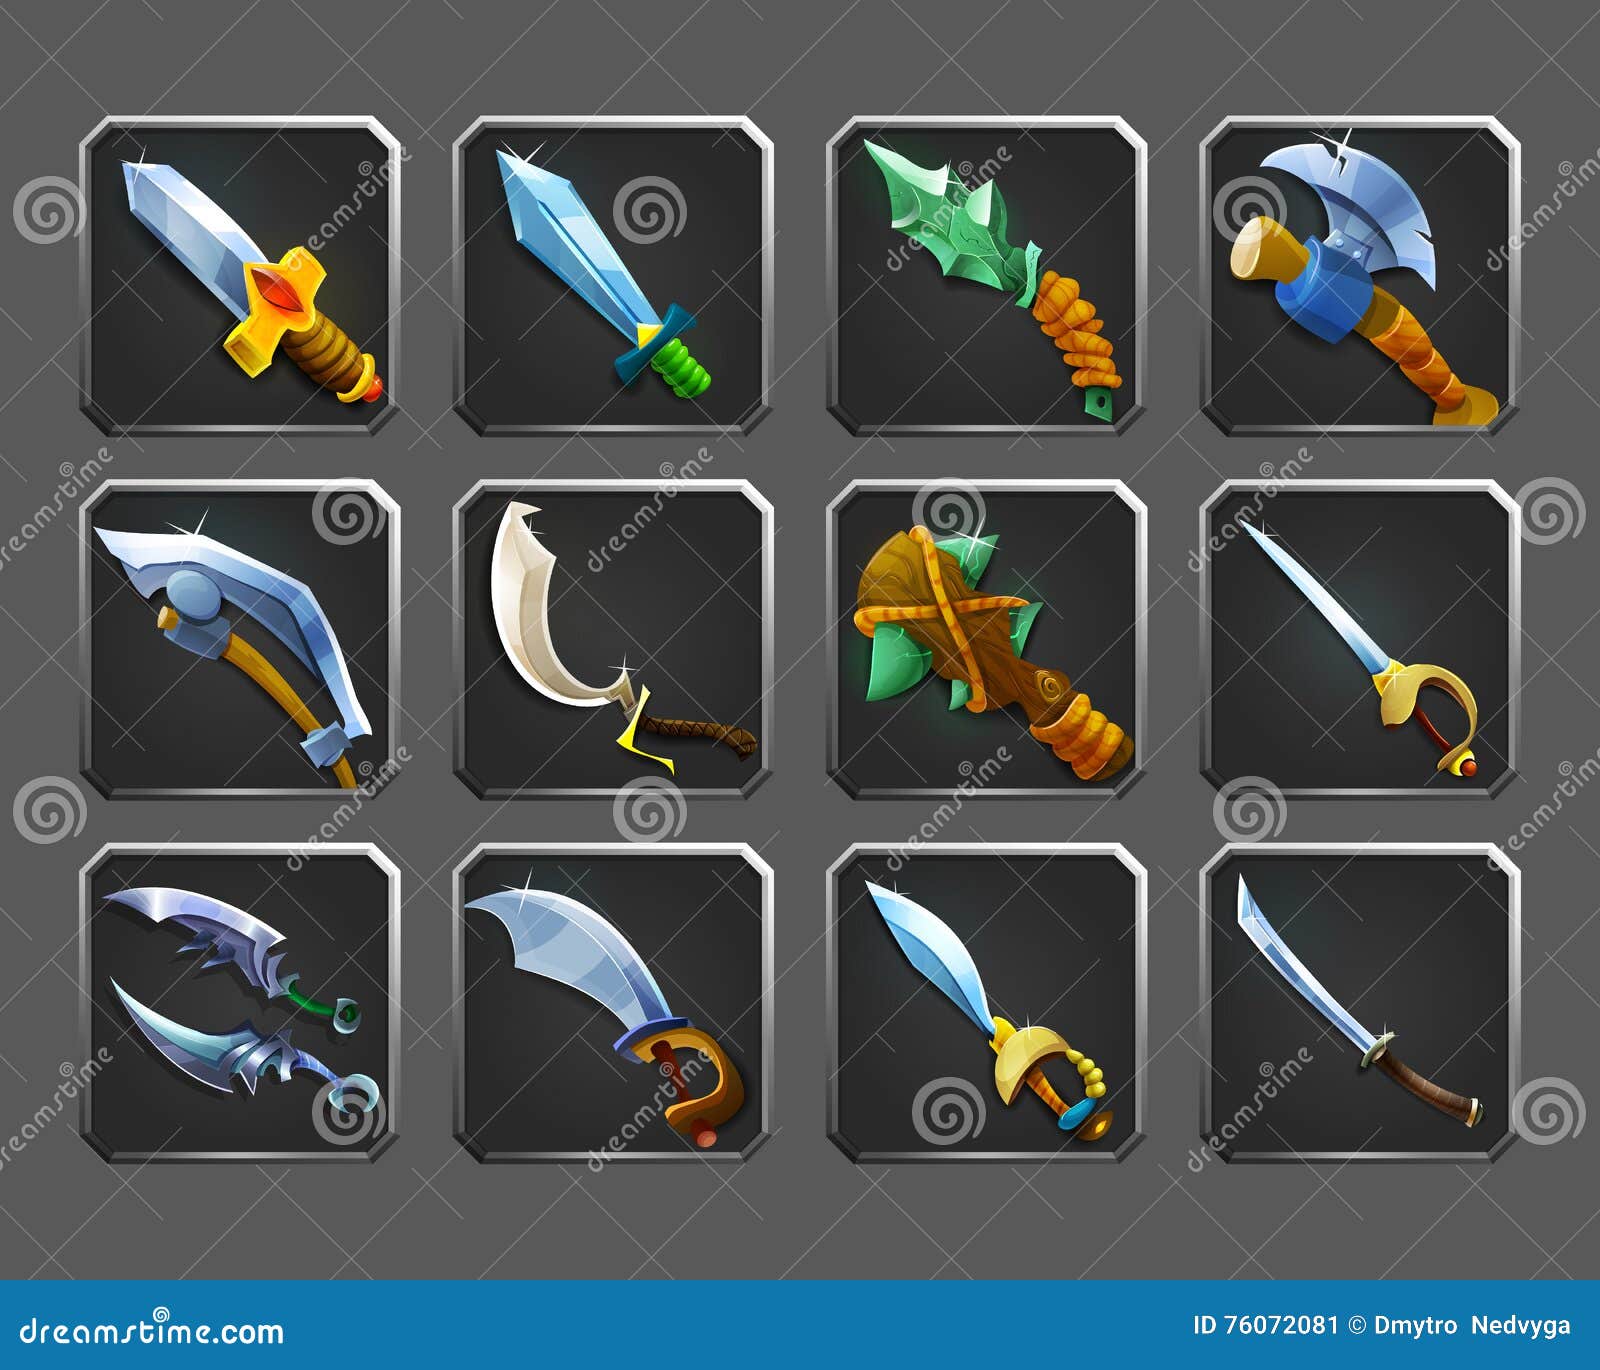 set of decoration icons for games. collection of medieval weapons.